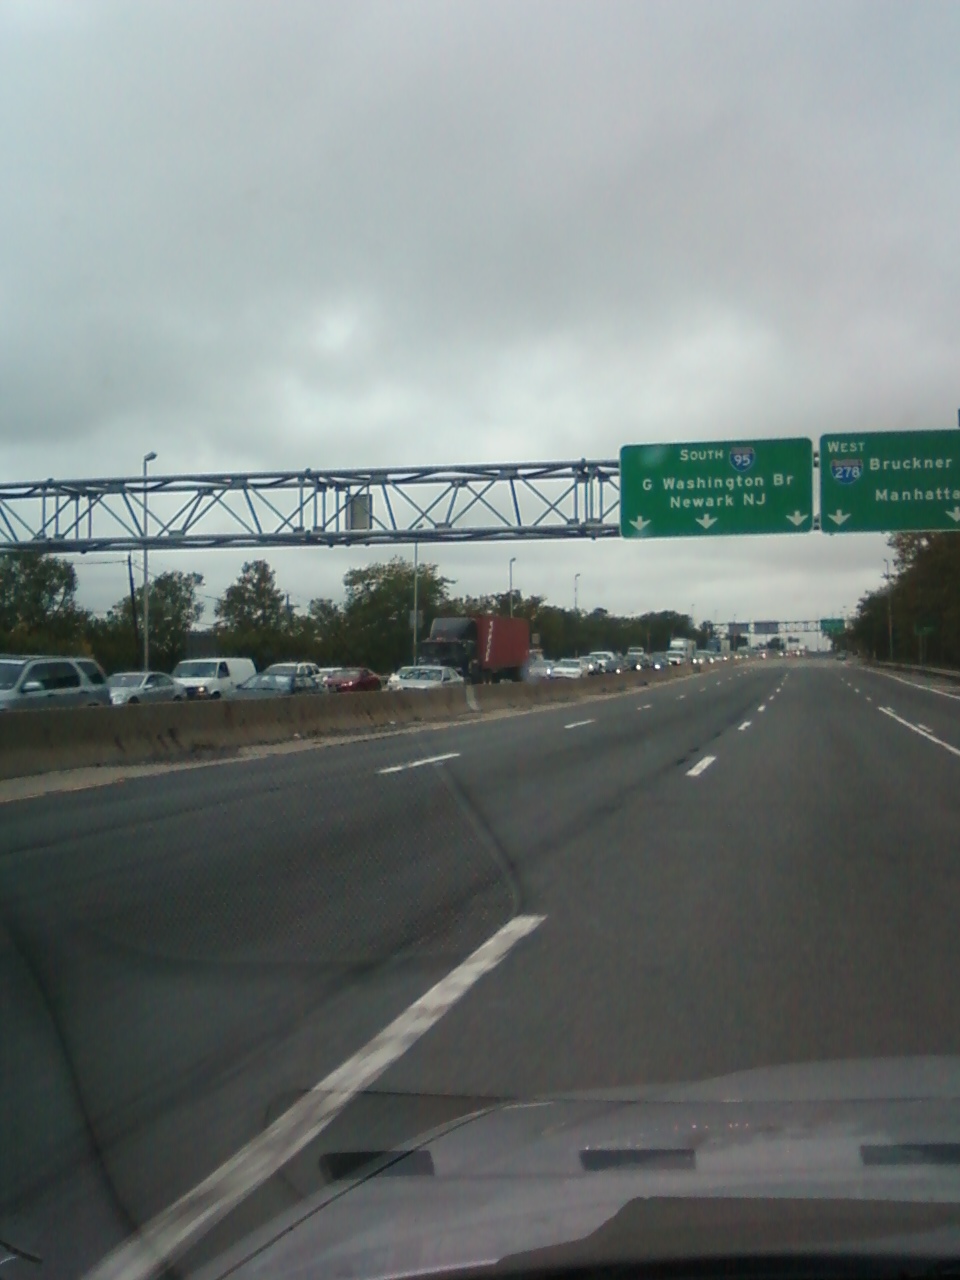 09/28/2011- I-295 southbound gridlock while approaching Throgg's Neck Bridge toll
facility